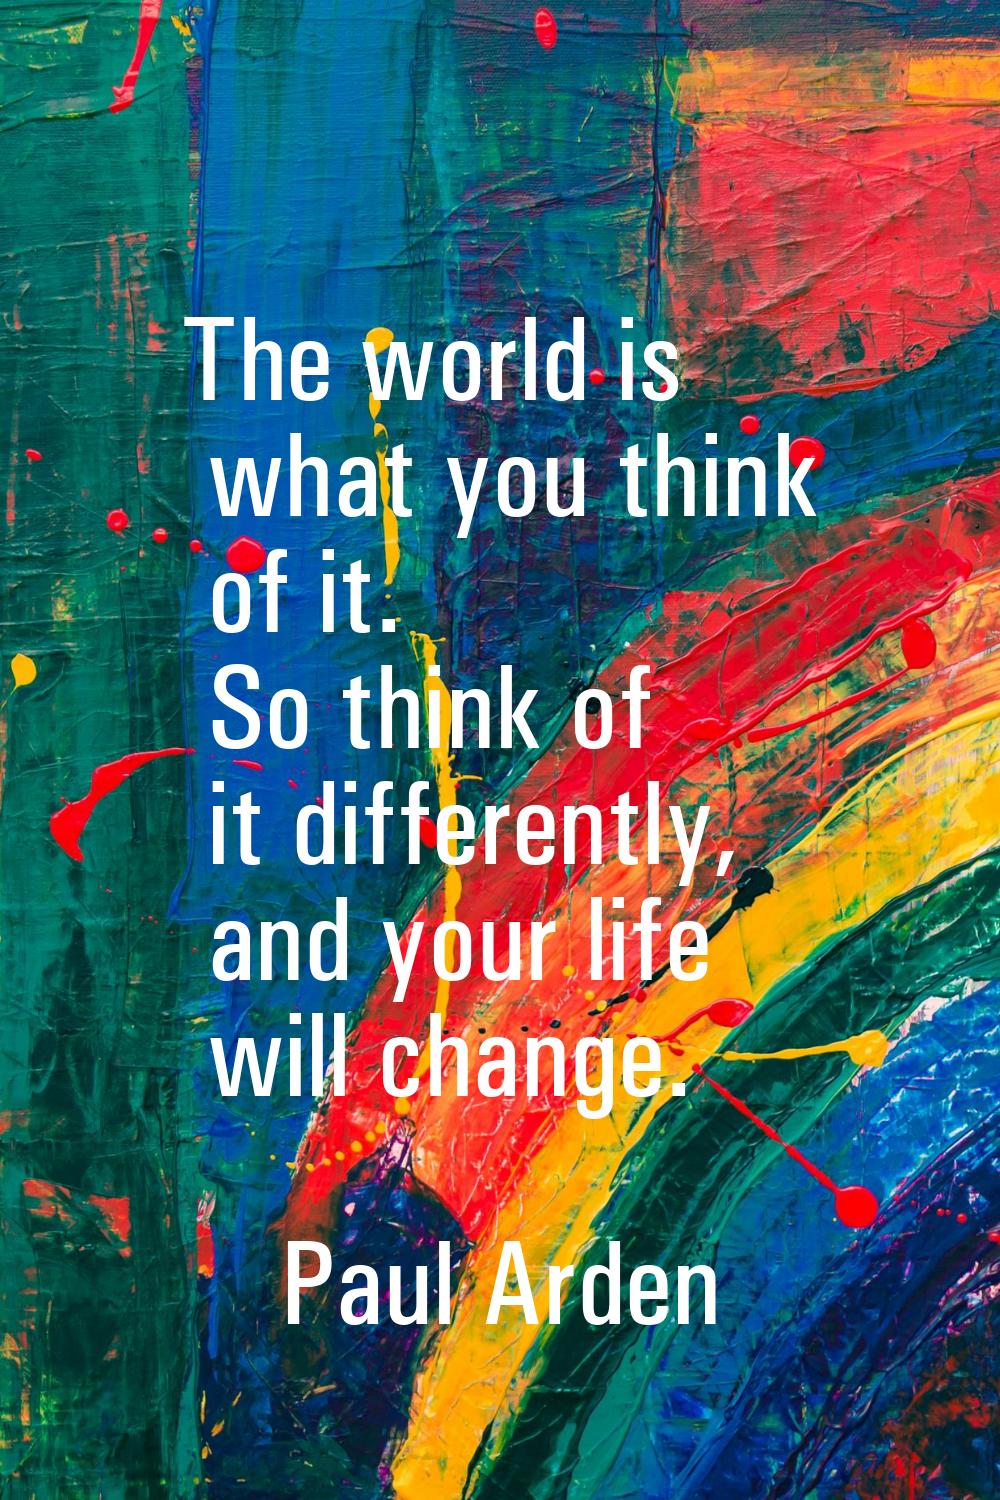 The world is what you think of it. So think of it differently, and your life will change.